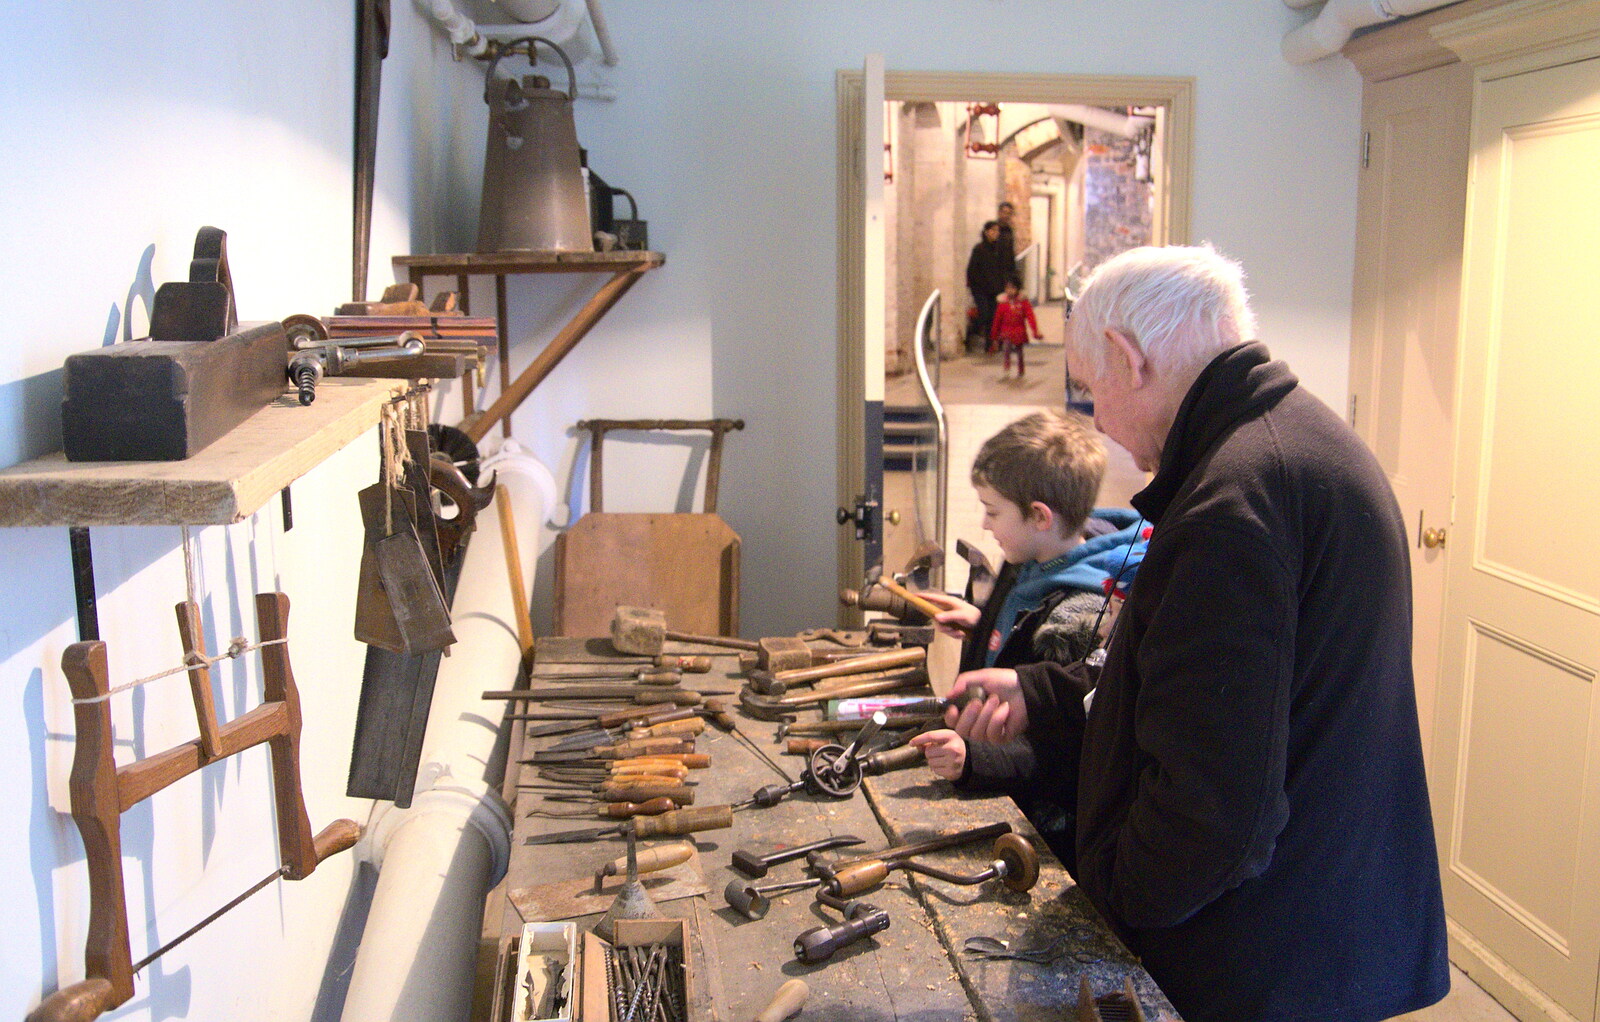 Fred tries some early 20th century wood tools from Life Below Stairs, Ickworth House, Horringer, Suffolk - 28th January 2018